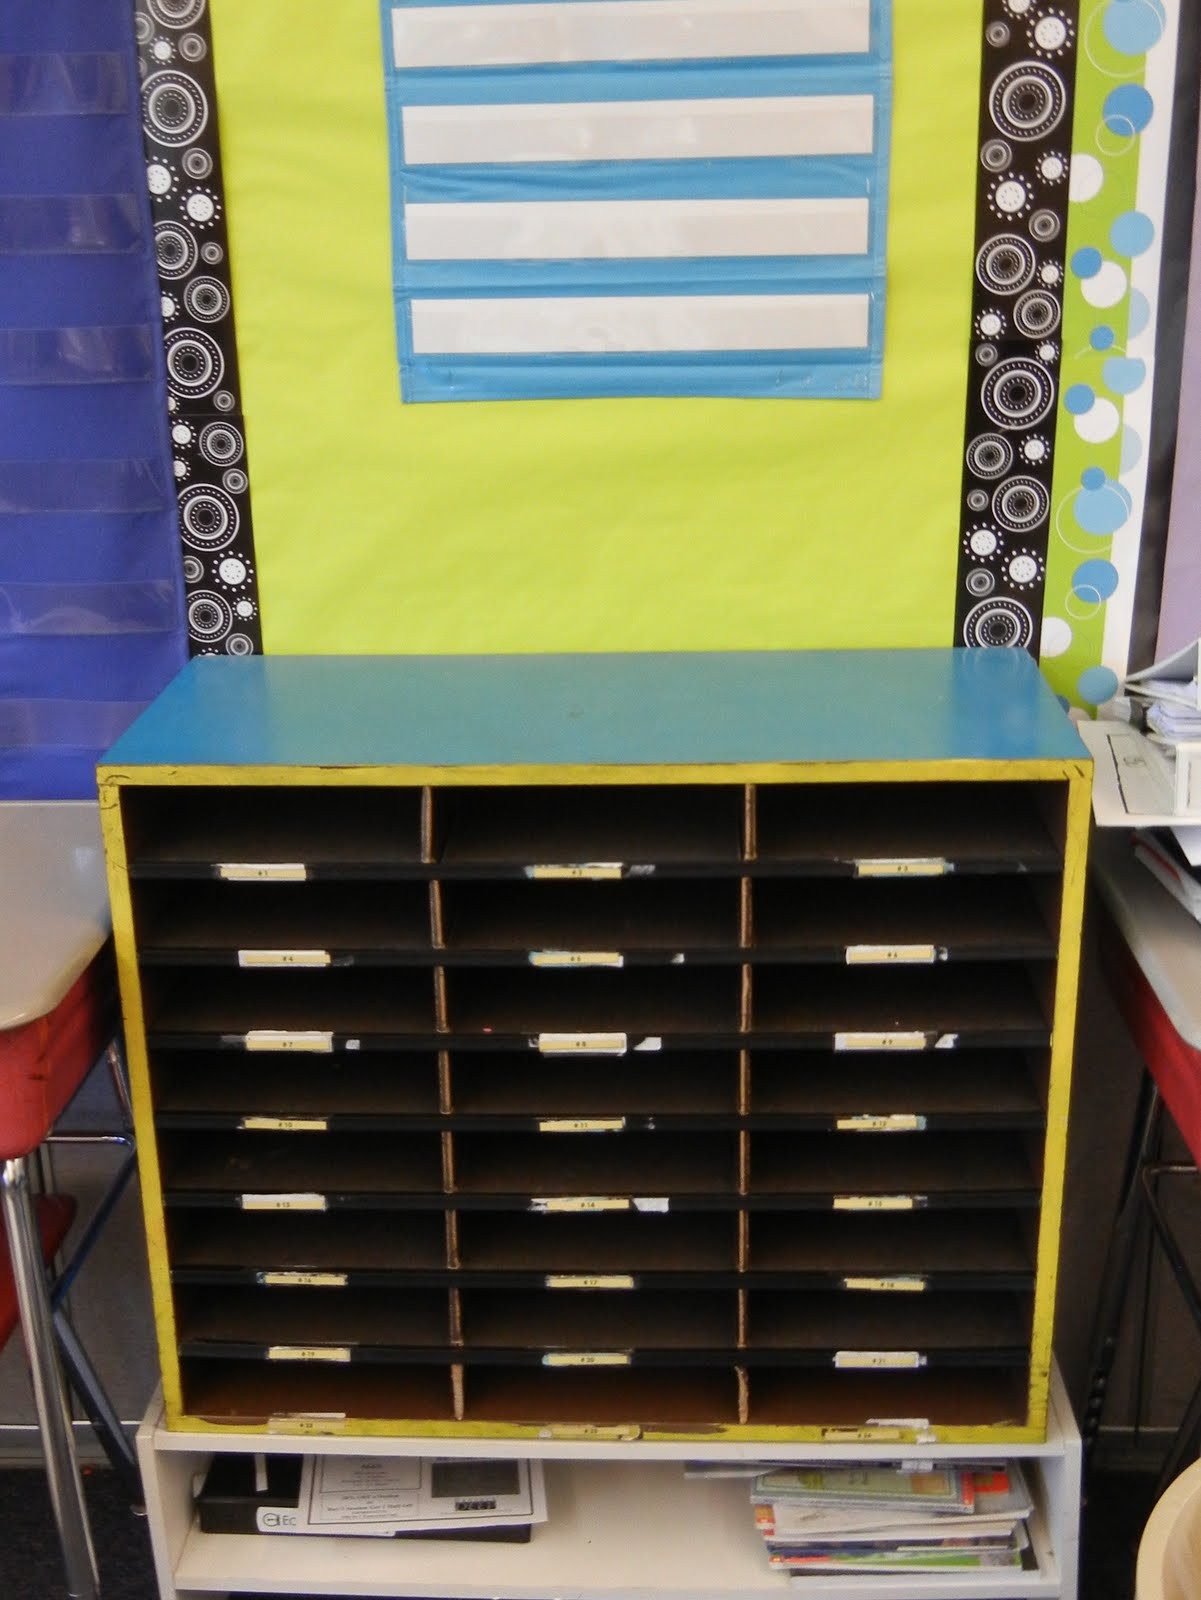 Student Mailboxes DIY
 Ideas for Cheap and Easy STUDENT MAILBOXES in the